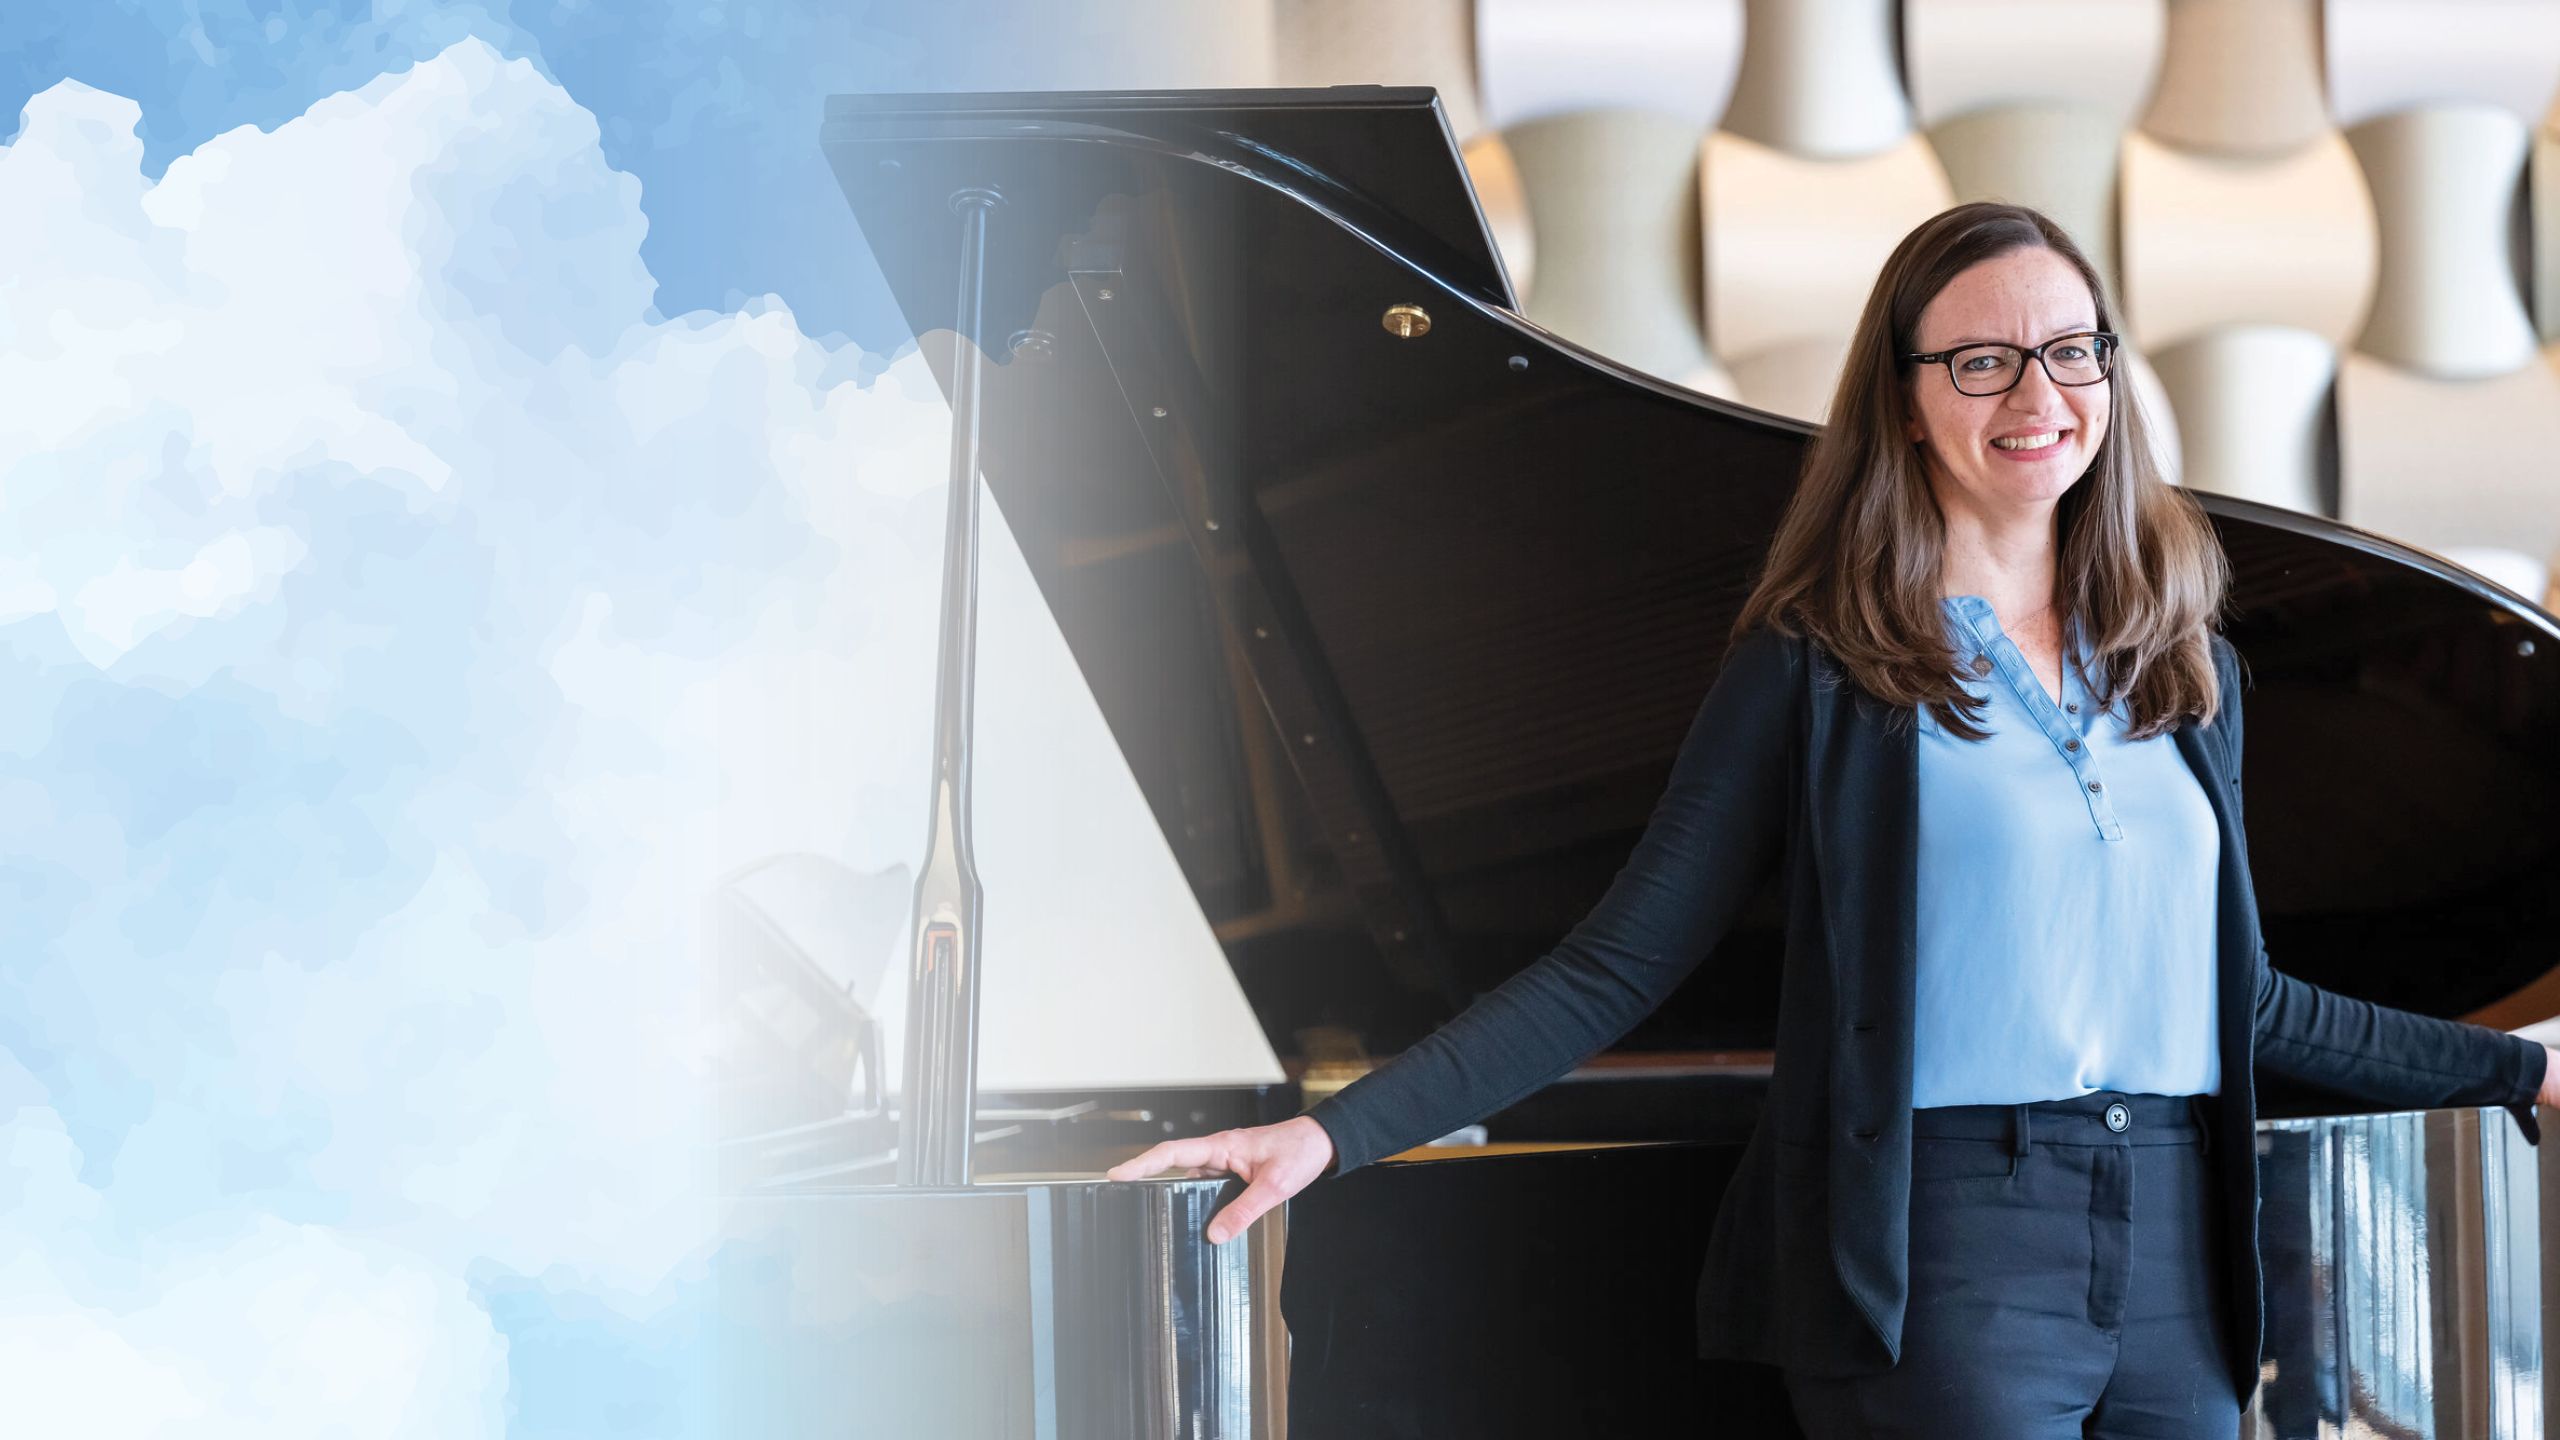 A photo of a white woman with glasses standing in front of a piano and smiling.